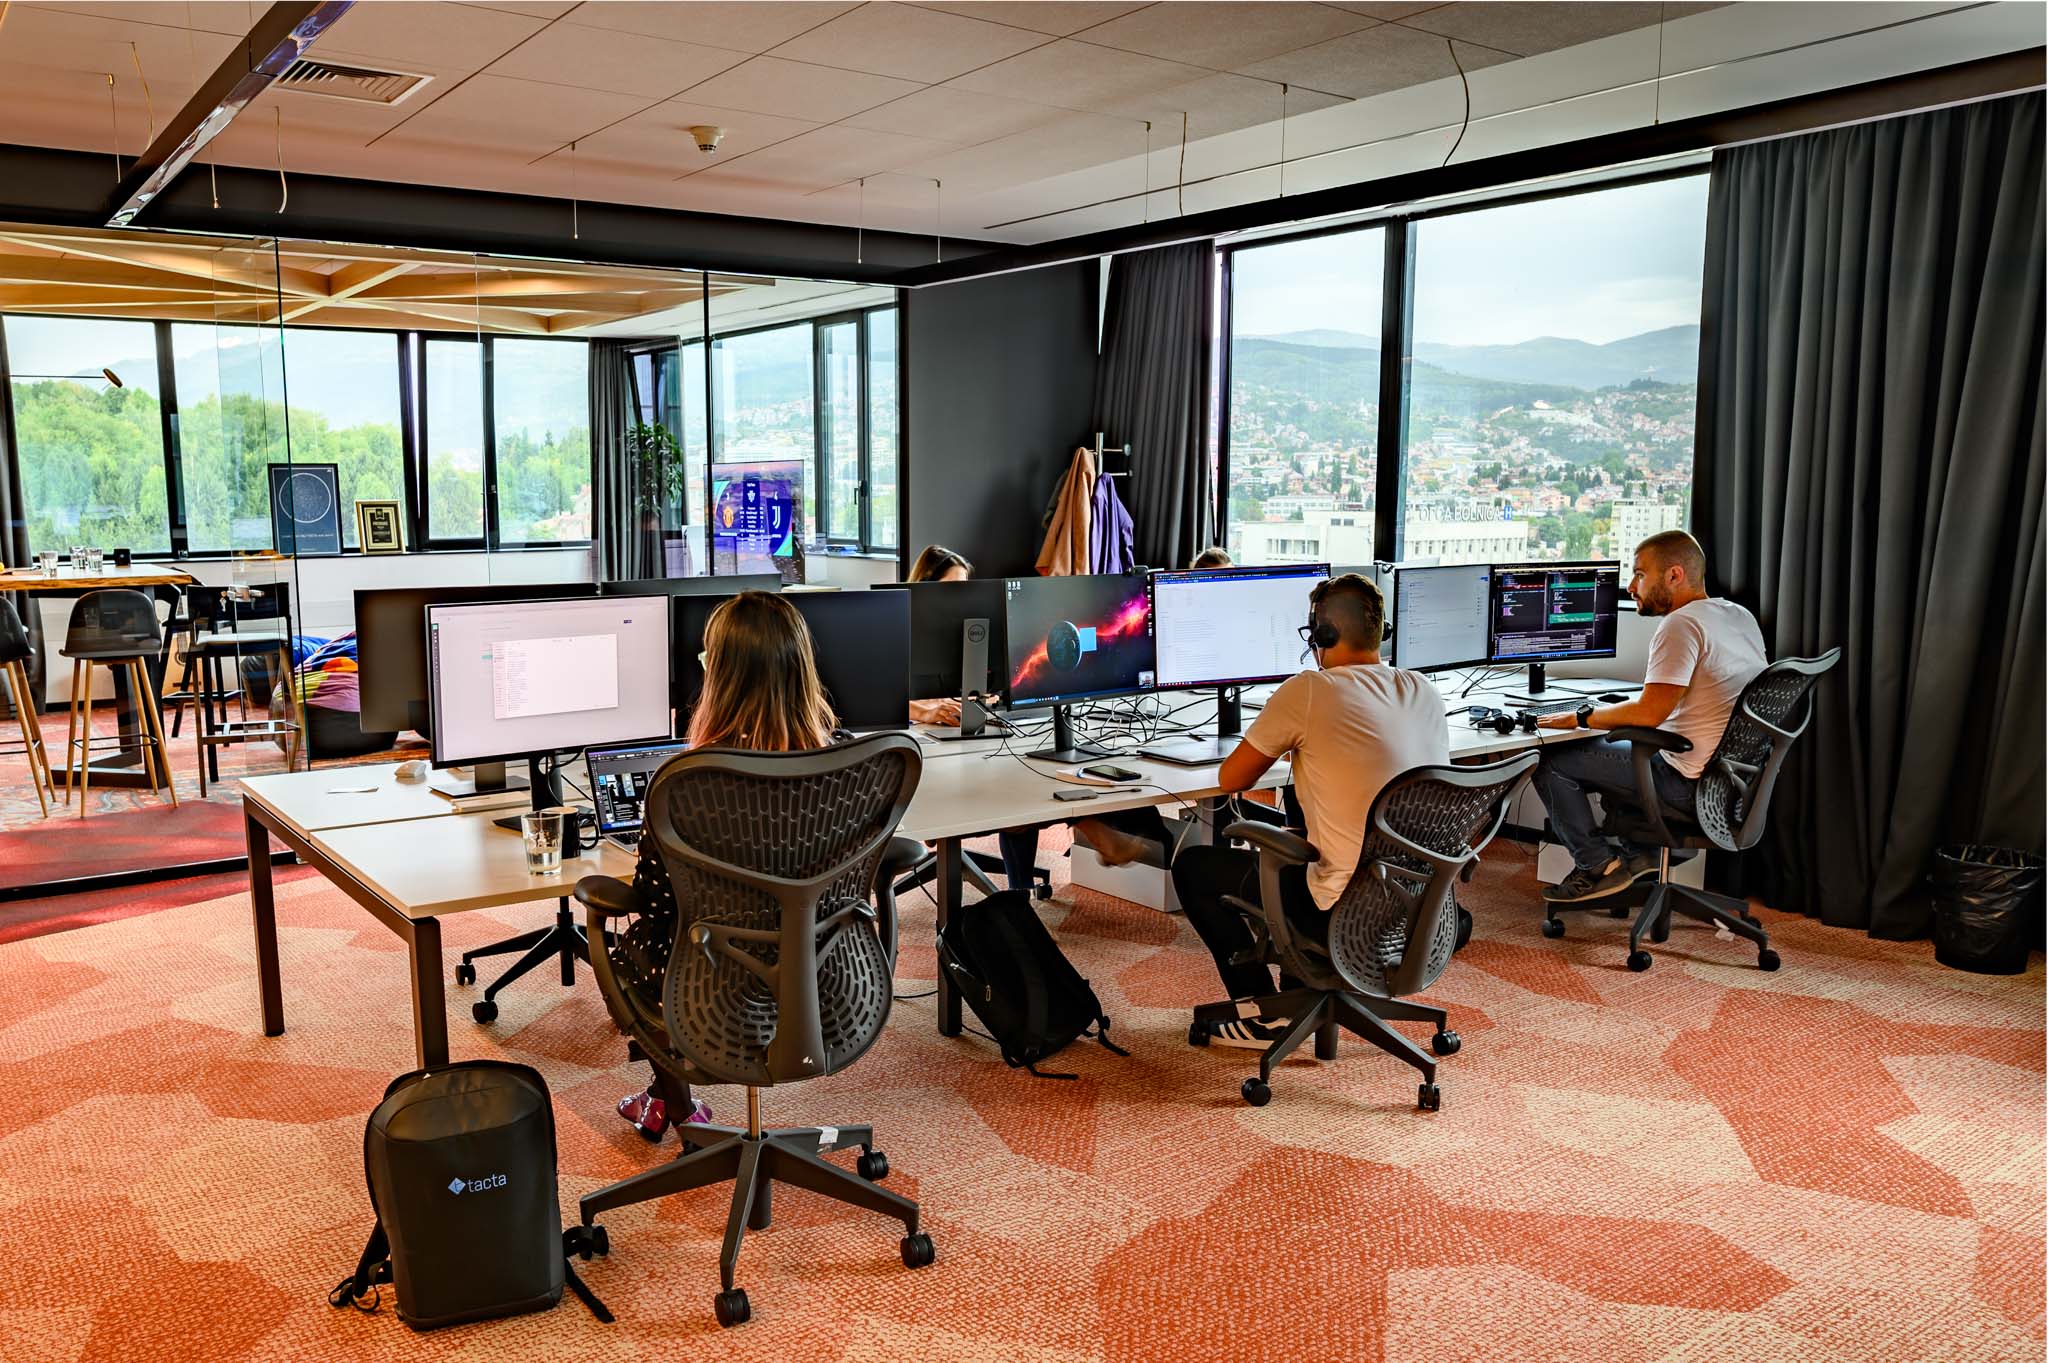 Tacta offices and Tacta employees working